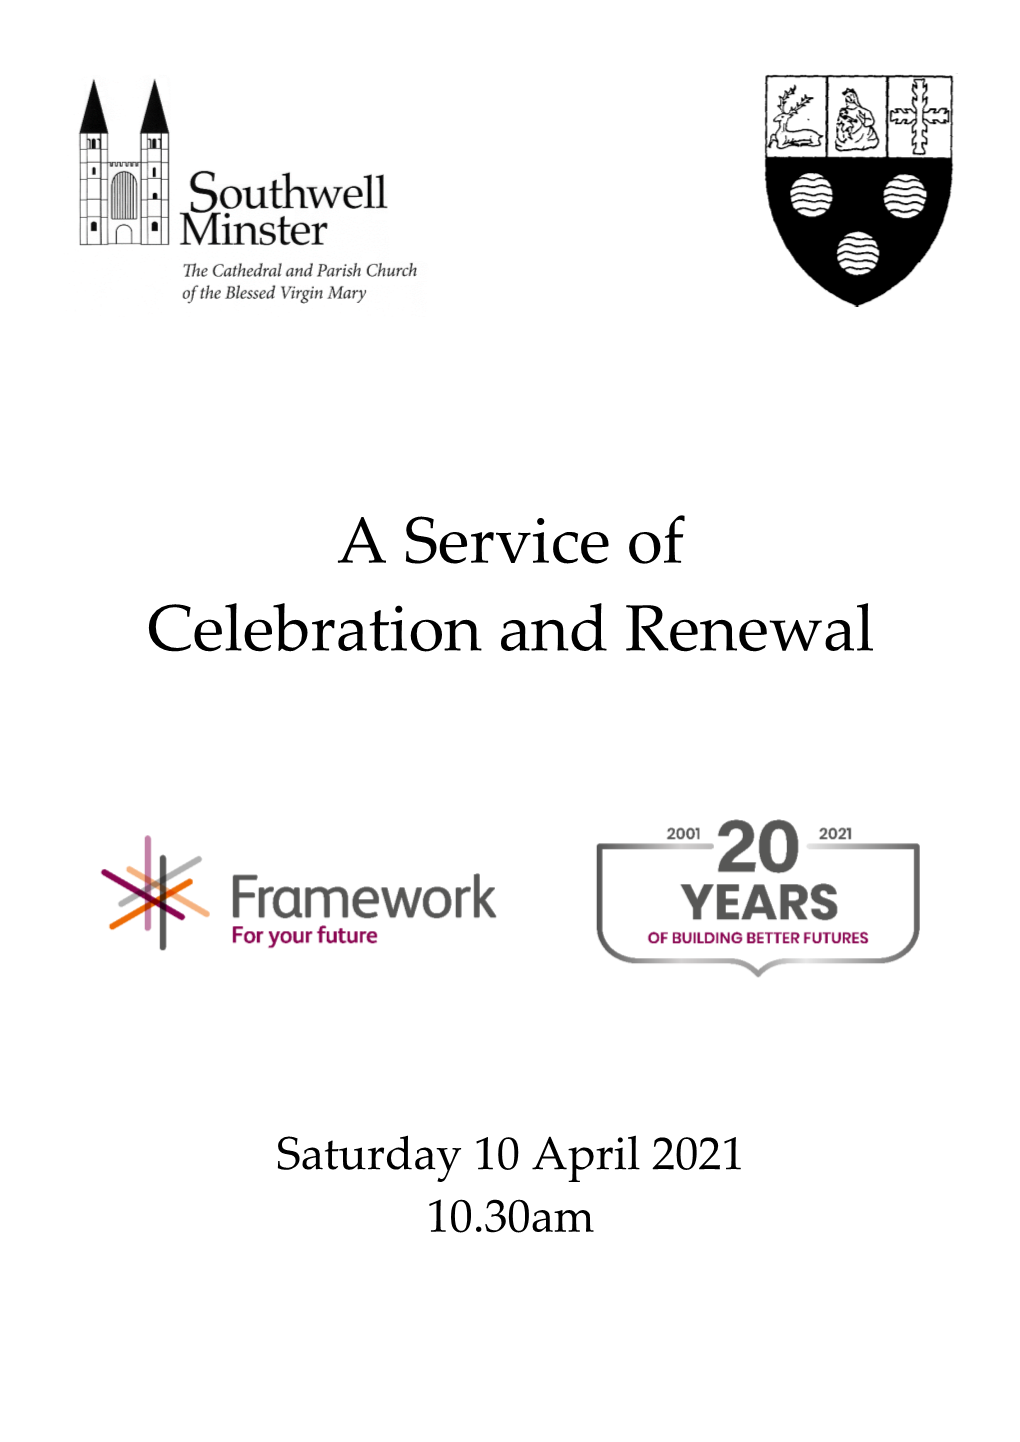 A Service of Celebration and Renewal